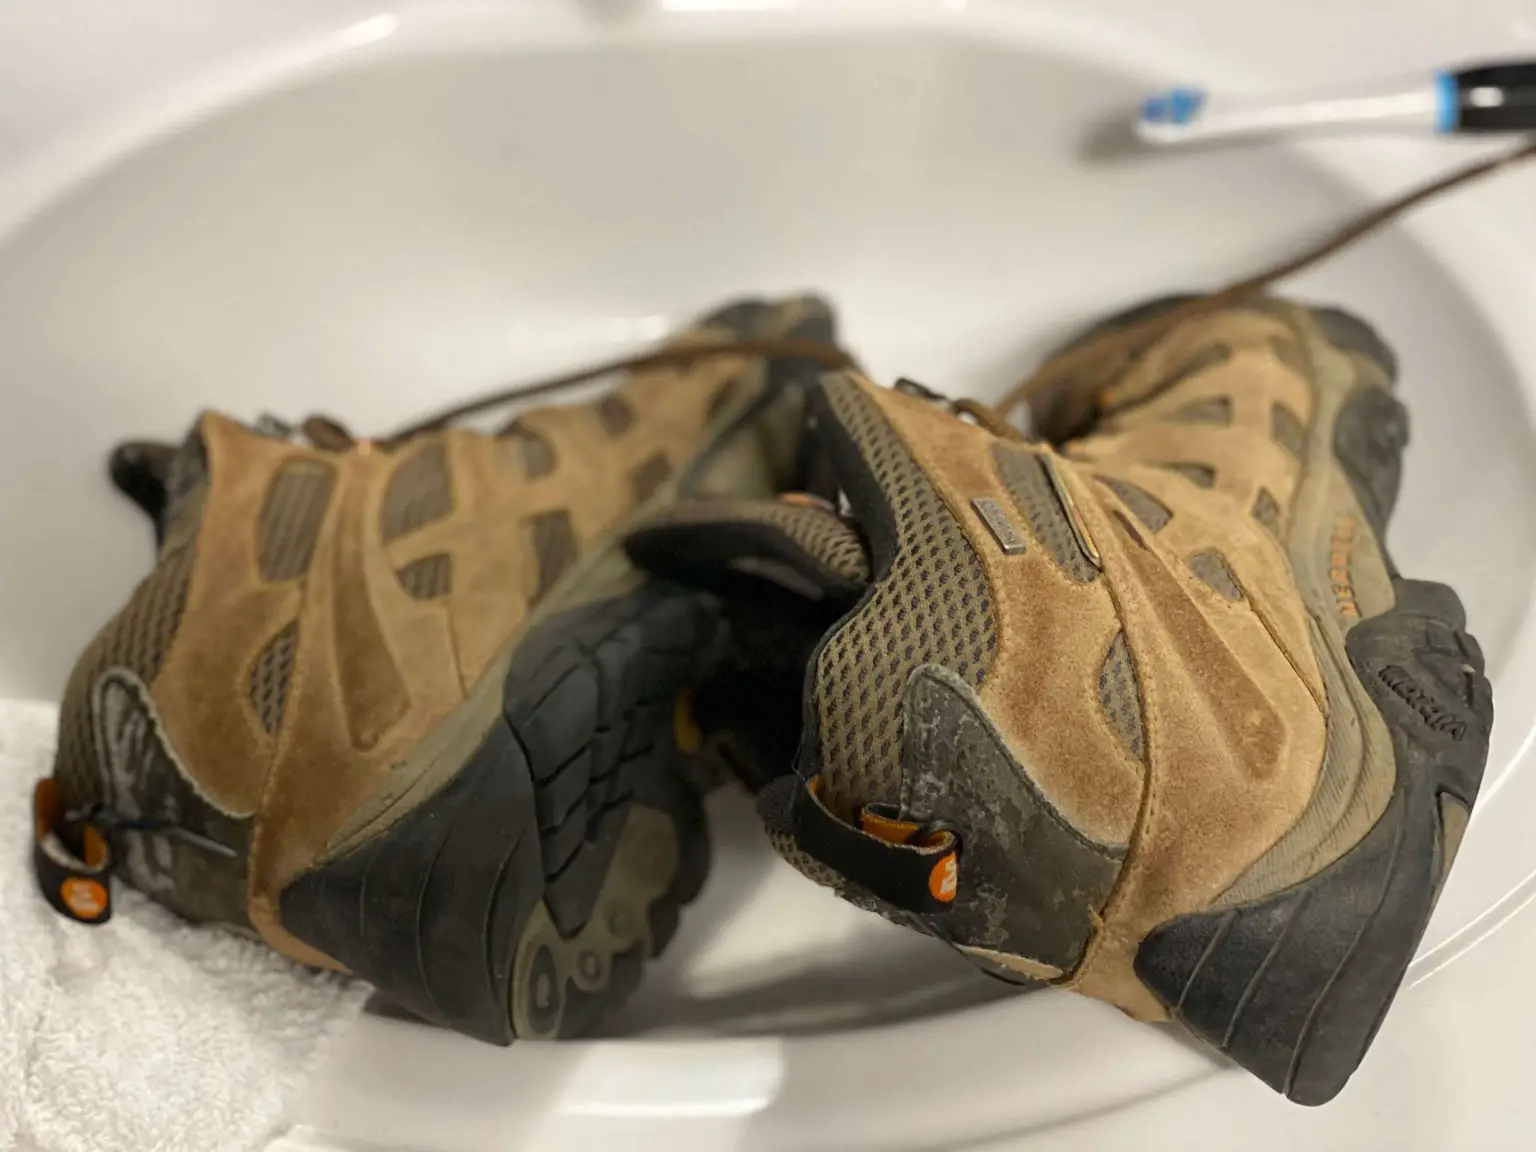 Cleaning Your Merrell Hiking Shoes: Can They Be Washed? - Hello Hiker